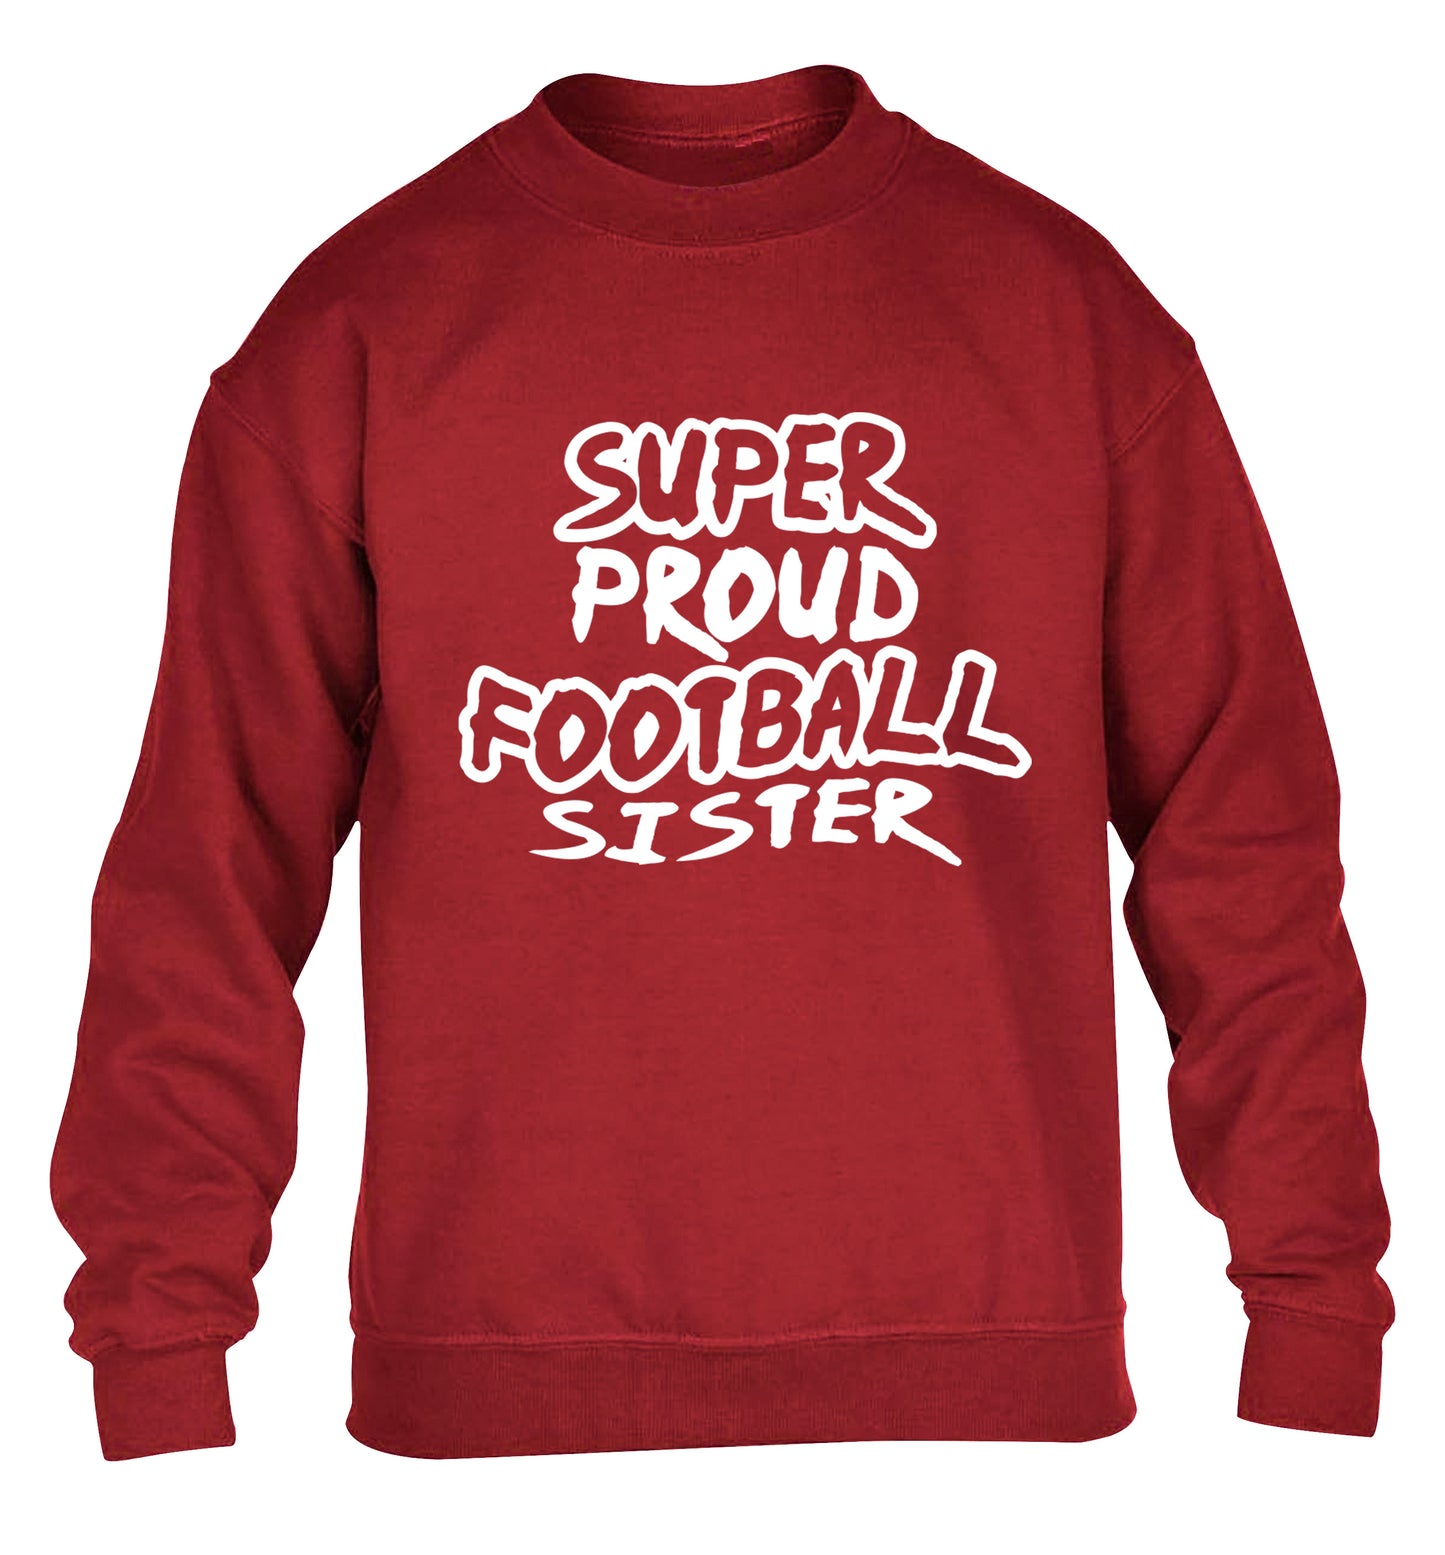 Super proud football sister children's grey sweater 12-14 Years